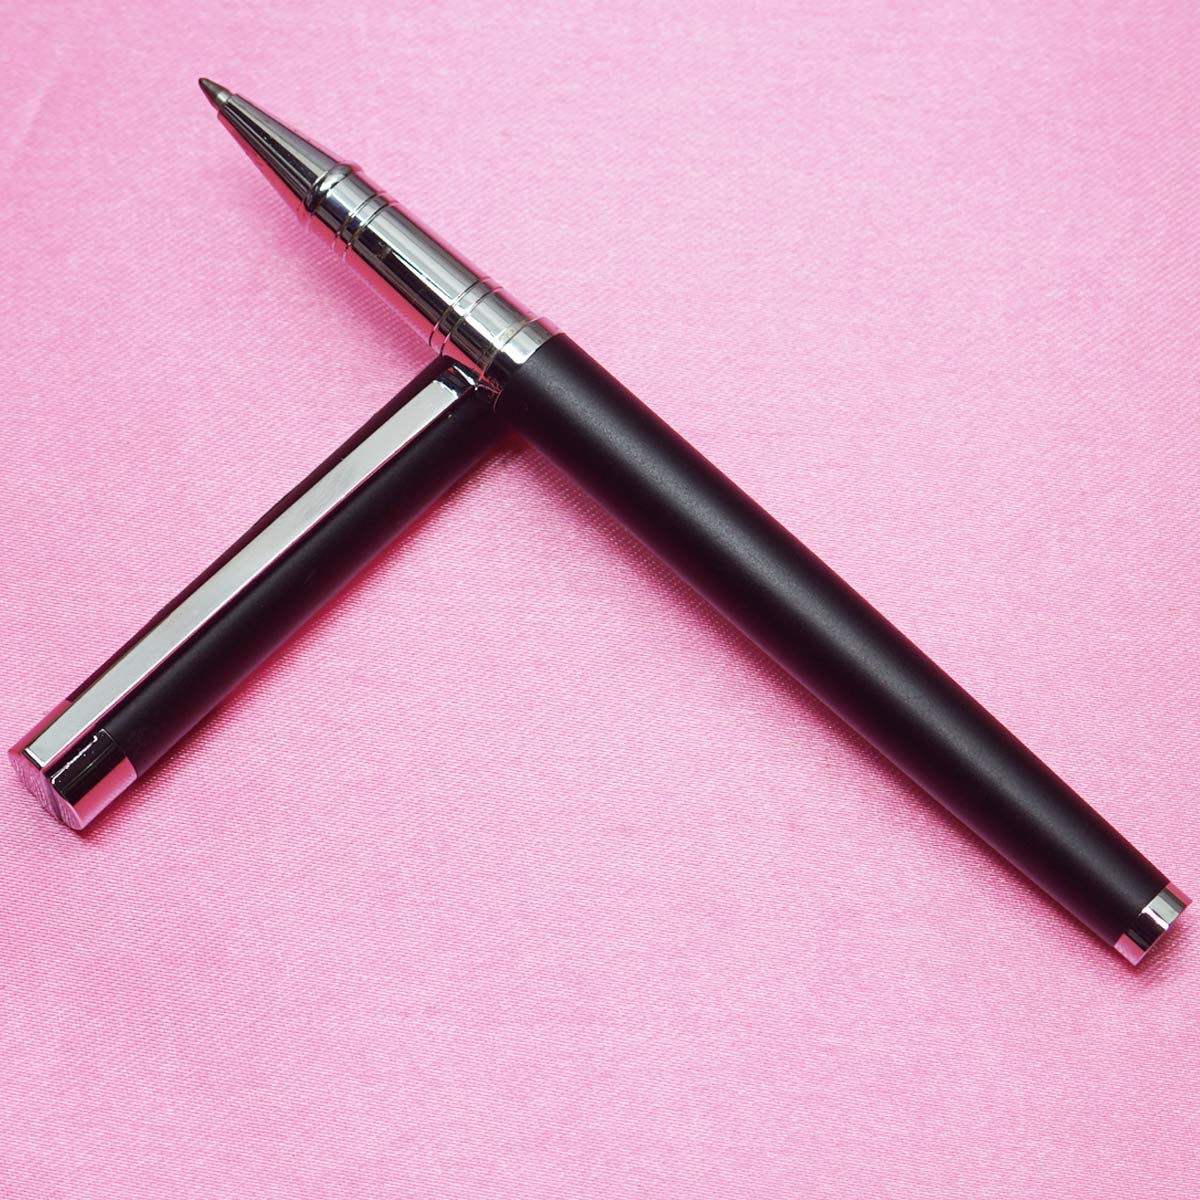 Jinhao 126 Black Color Body and Cap with Silver Trims Roller Ball Pen SKU 22342